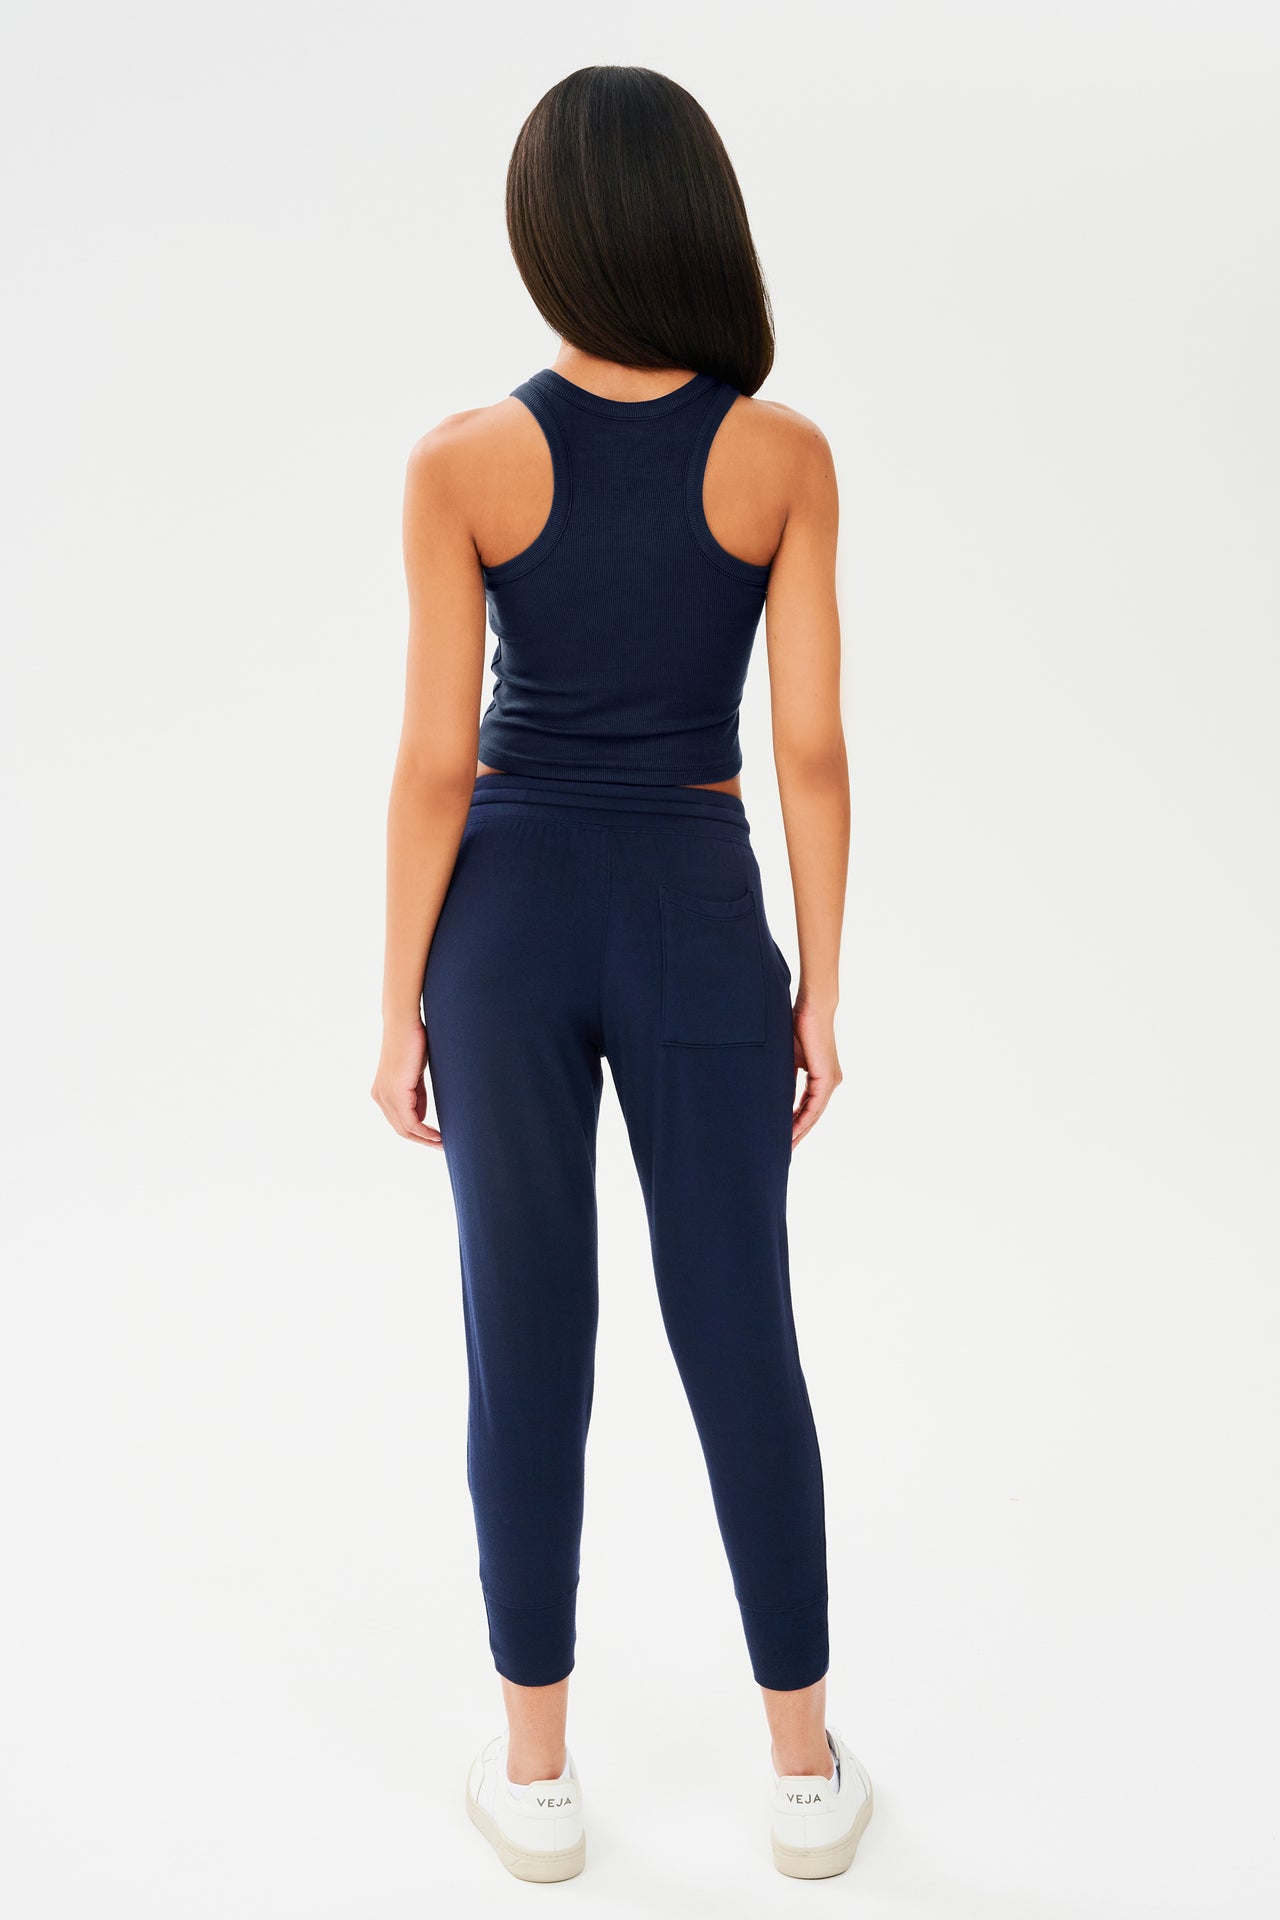 The back view of a woman wearing a SPLITS59 Kiki Rib Crop Tank in Indigo and joggers, ready for gym workouts.